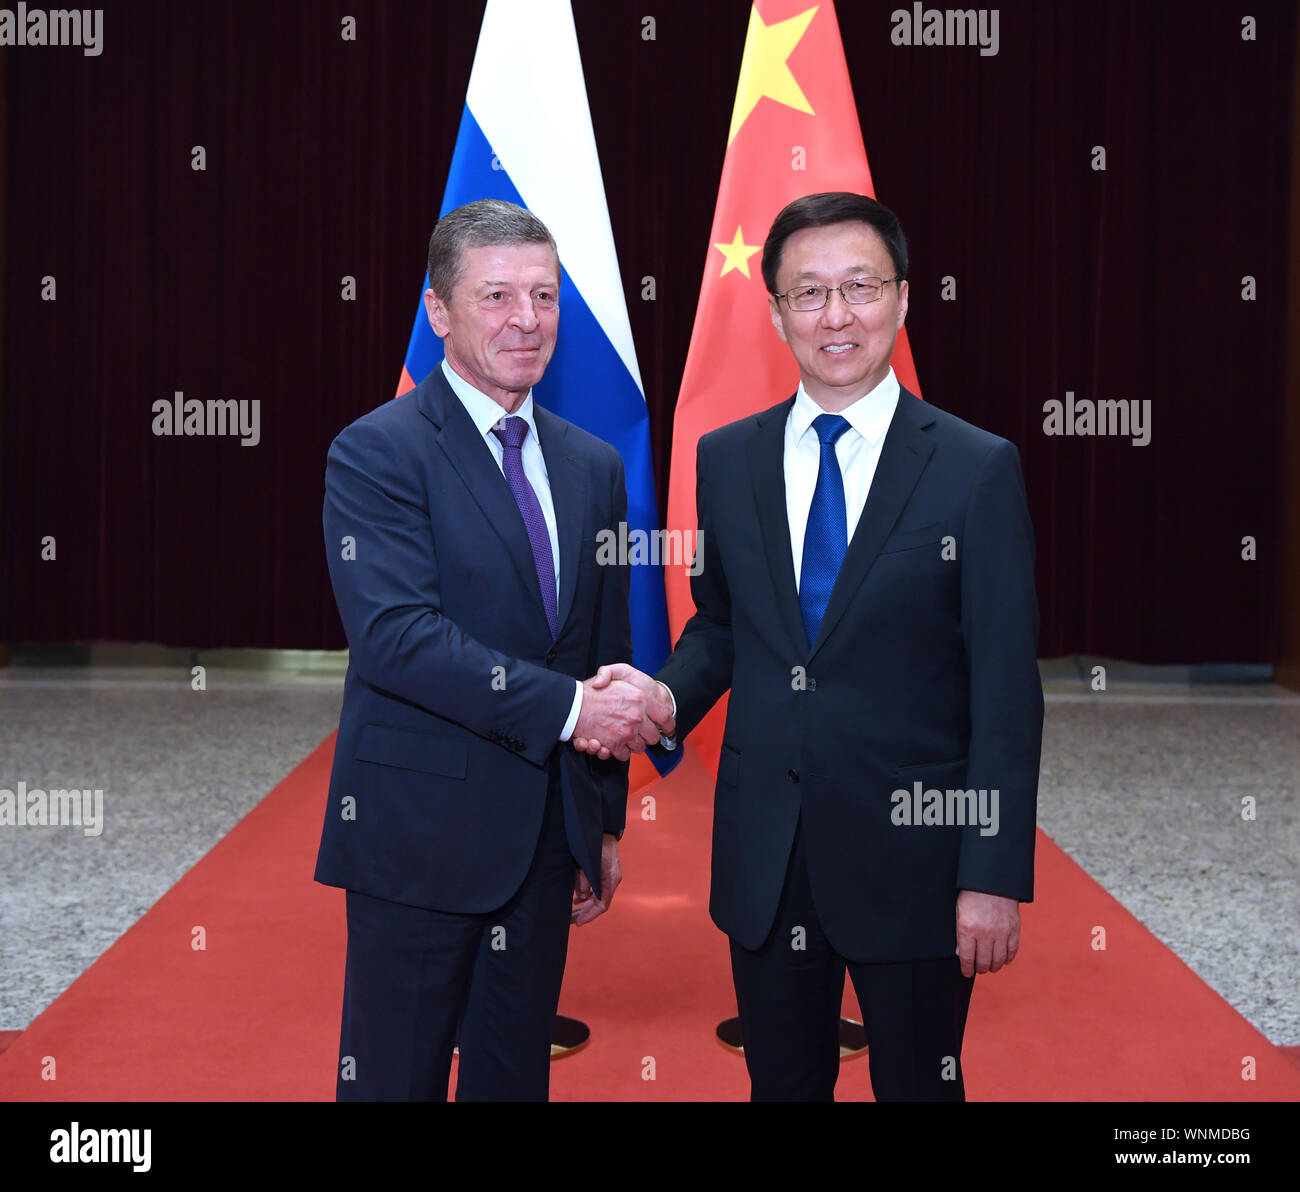 (190906) -- BEIJING, Sept. 6, 2019 (Xinhua) -- Chinese Vice Premier Han Zheng, also a member of the Standing Committee of the Political Bureau of the Communist Party of China Central Committee, meets with Russian Deputy Prime Minister Dmitry Kozak in Beijing, capital of China, Sept. 6, 2019. Han and Kozak co-chaired the 16th meeting of the China-Russia Energy Cooperation Committee in Beijing on Friday. (Xinhua/Rao Aimin) Stock Photo